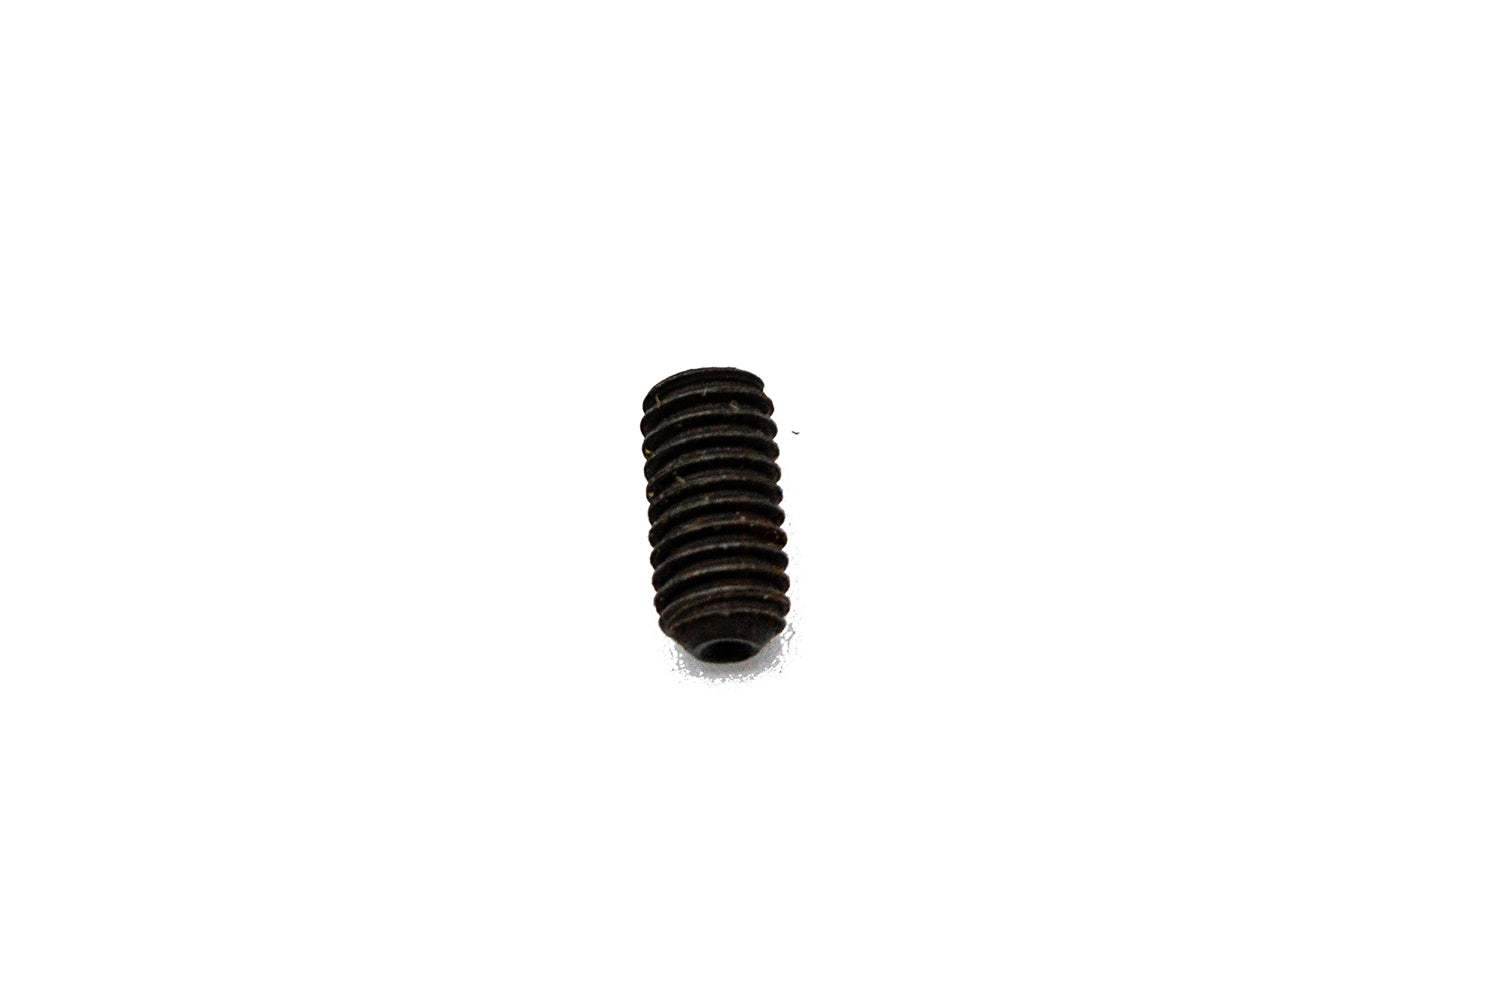 Stabilizer Screw (Part No.175) For KWA LM4 GBBR / (Part No.17) for KSC M4A1 GBB